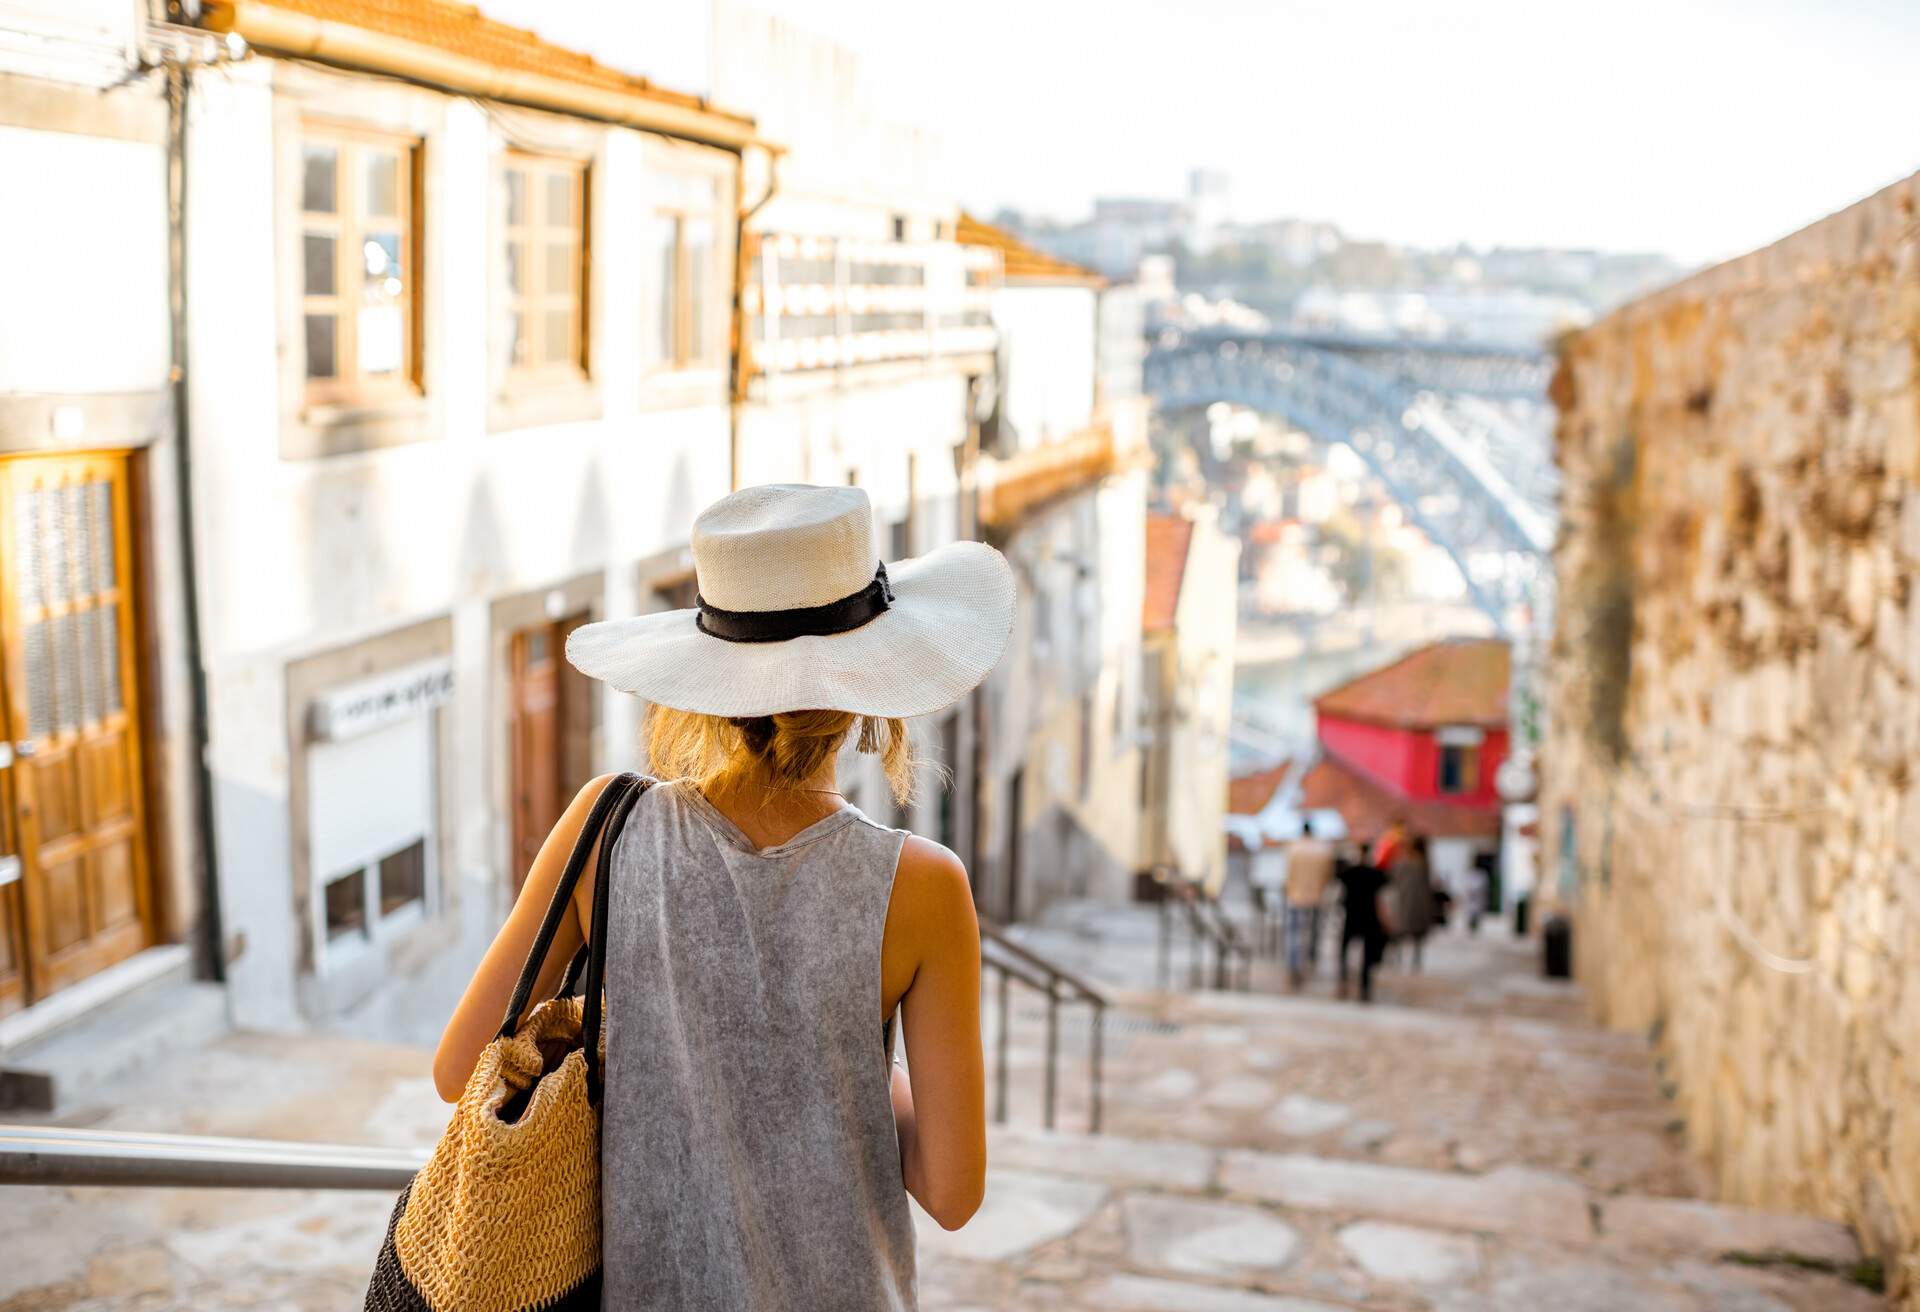 A young woman tourist, stylishly dressed and wearing a sunhat, confidently walks down the stairs of a charming, sunlit street with an out-of-focus background.